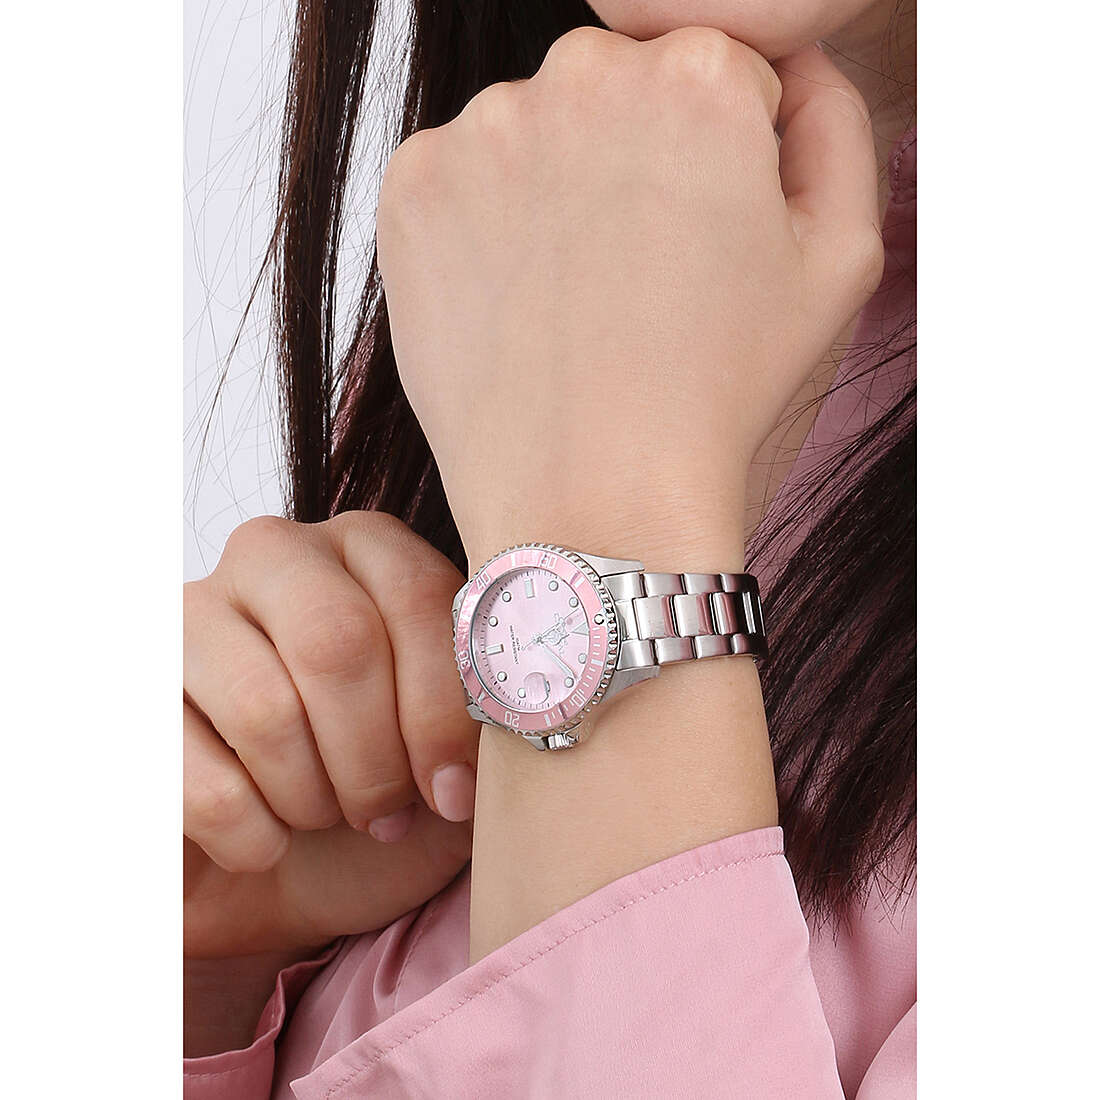 Capital only time Toujours woman AX342-04 wearing